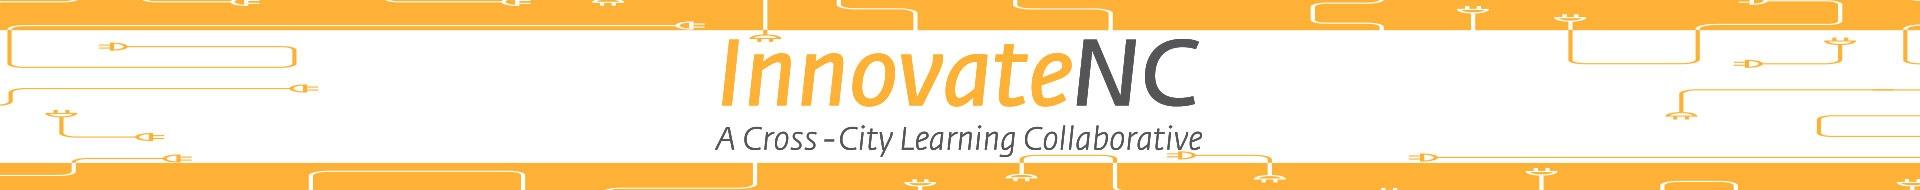 InnovateNC Accross-City Learning Collaborative